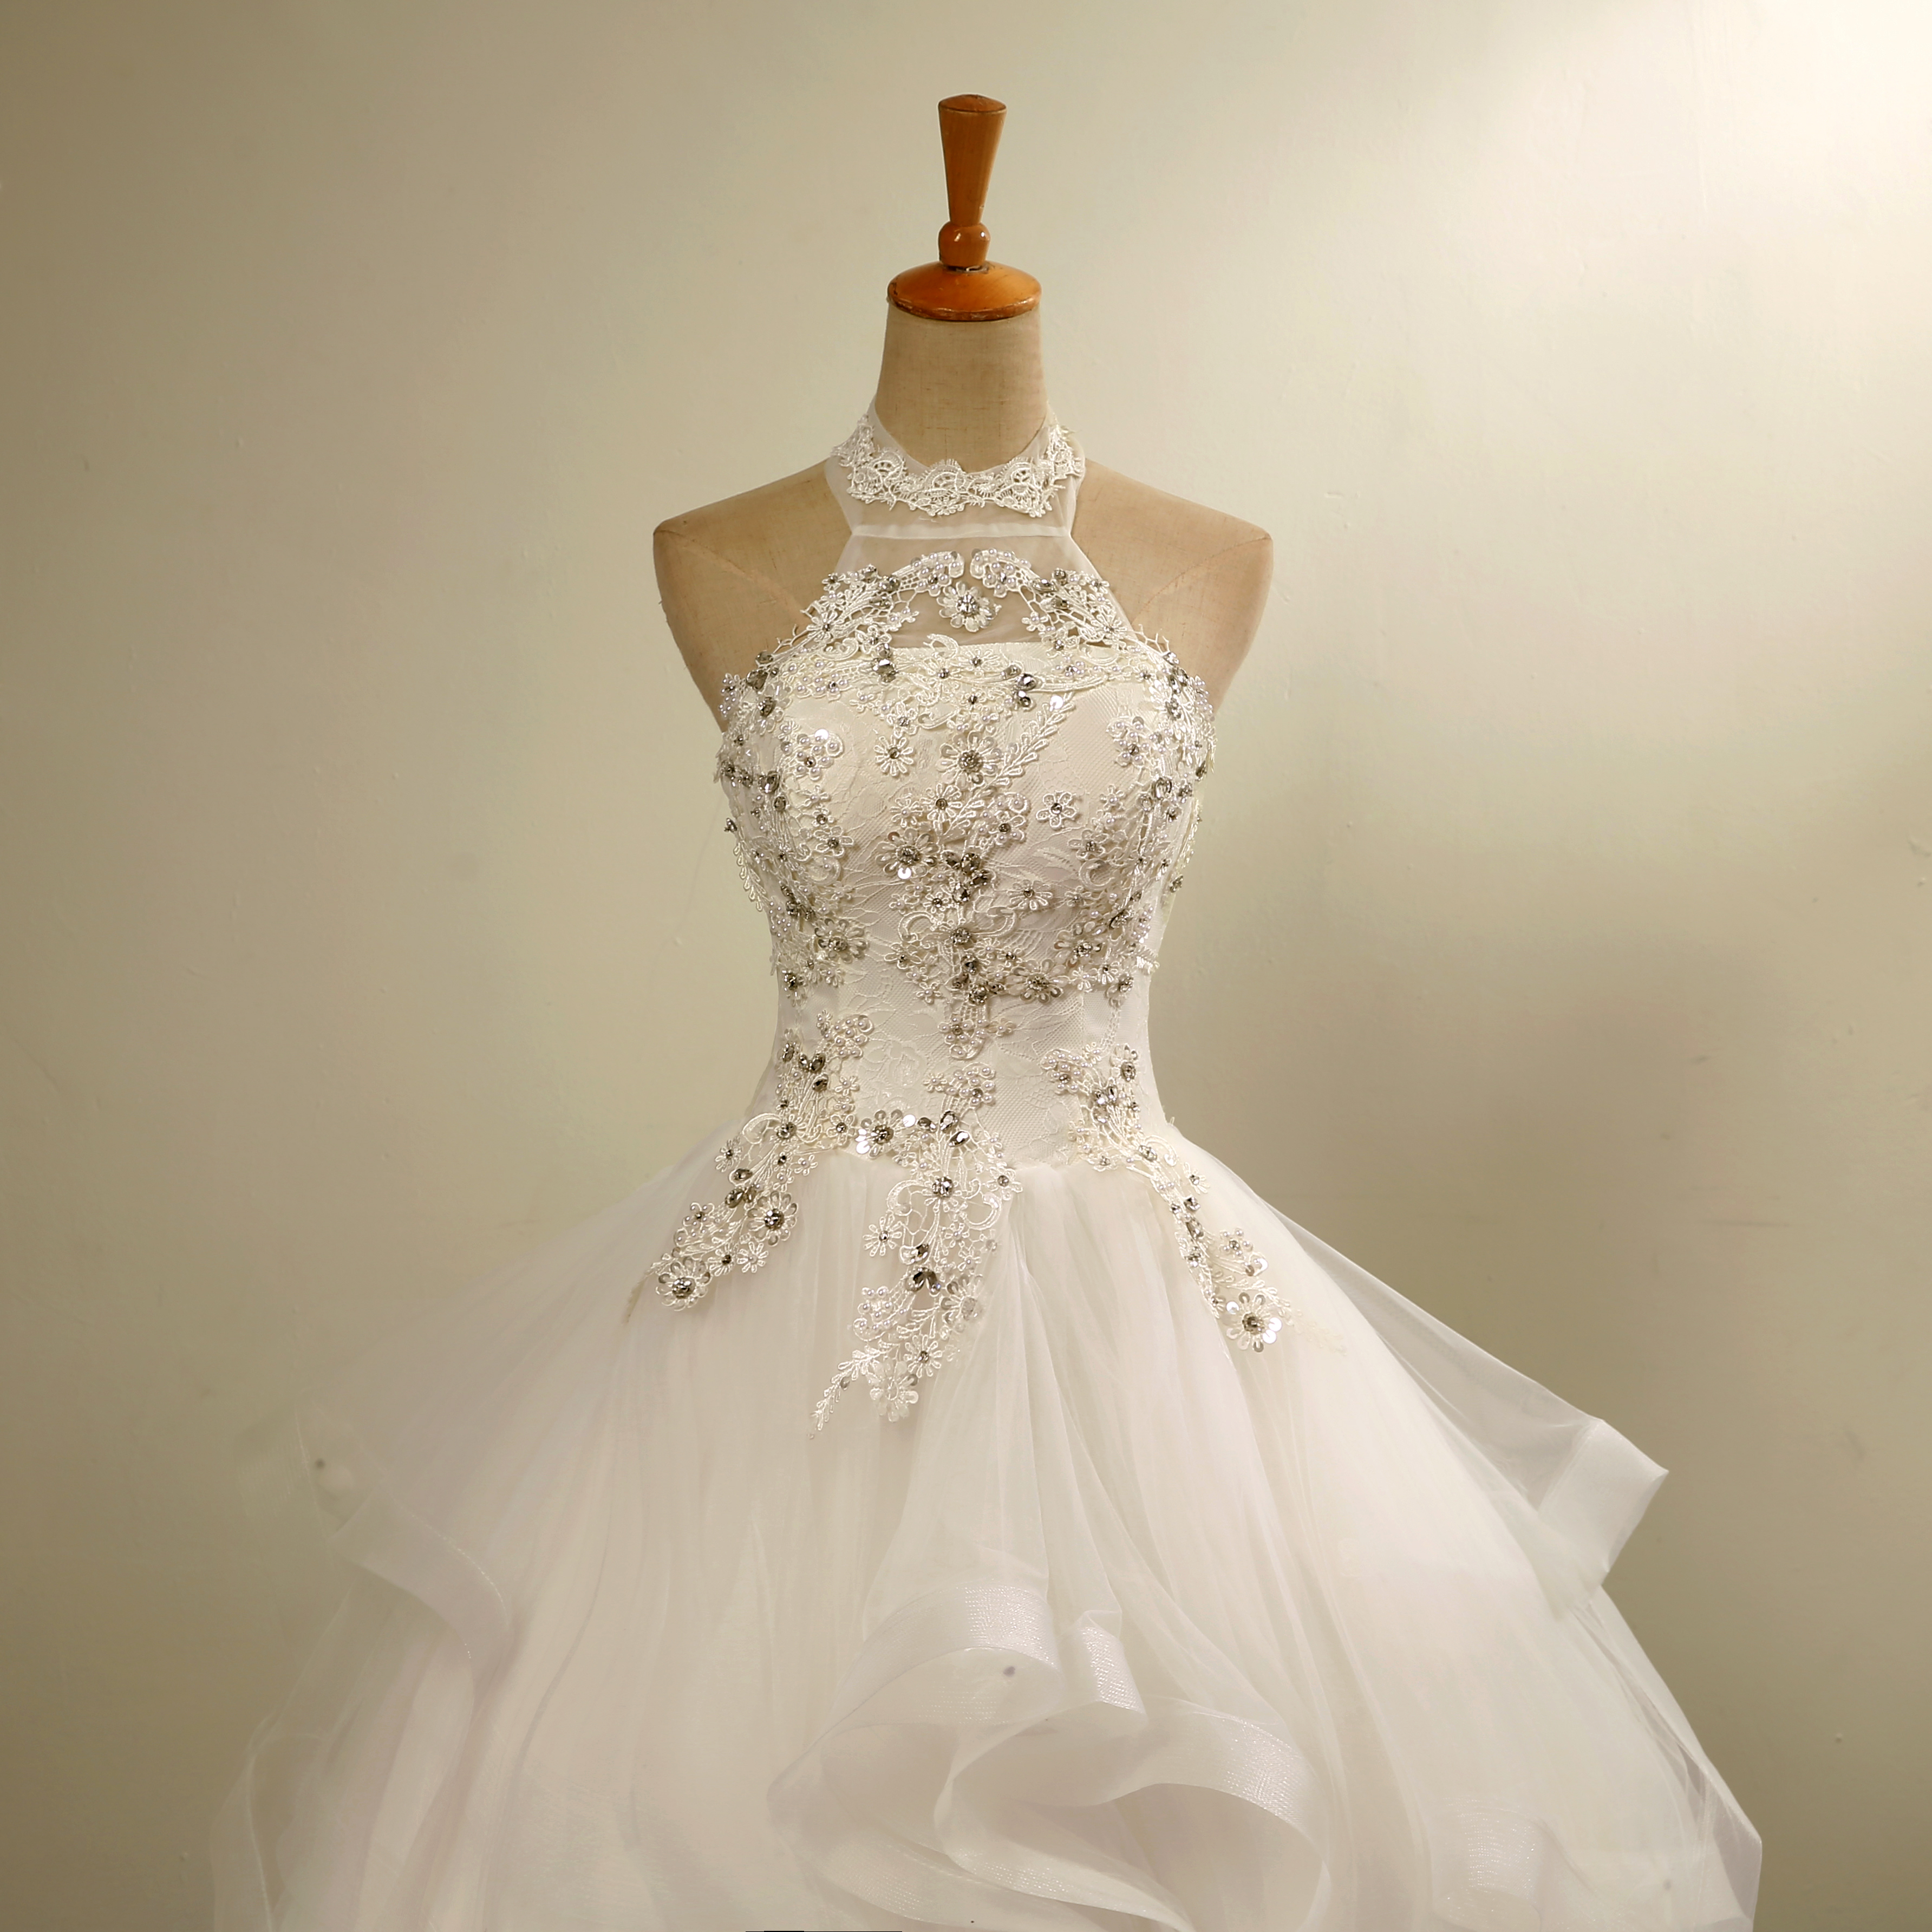 Halter Pearls Appliques Ball Gown Wedding Dress